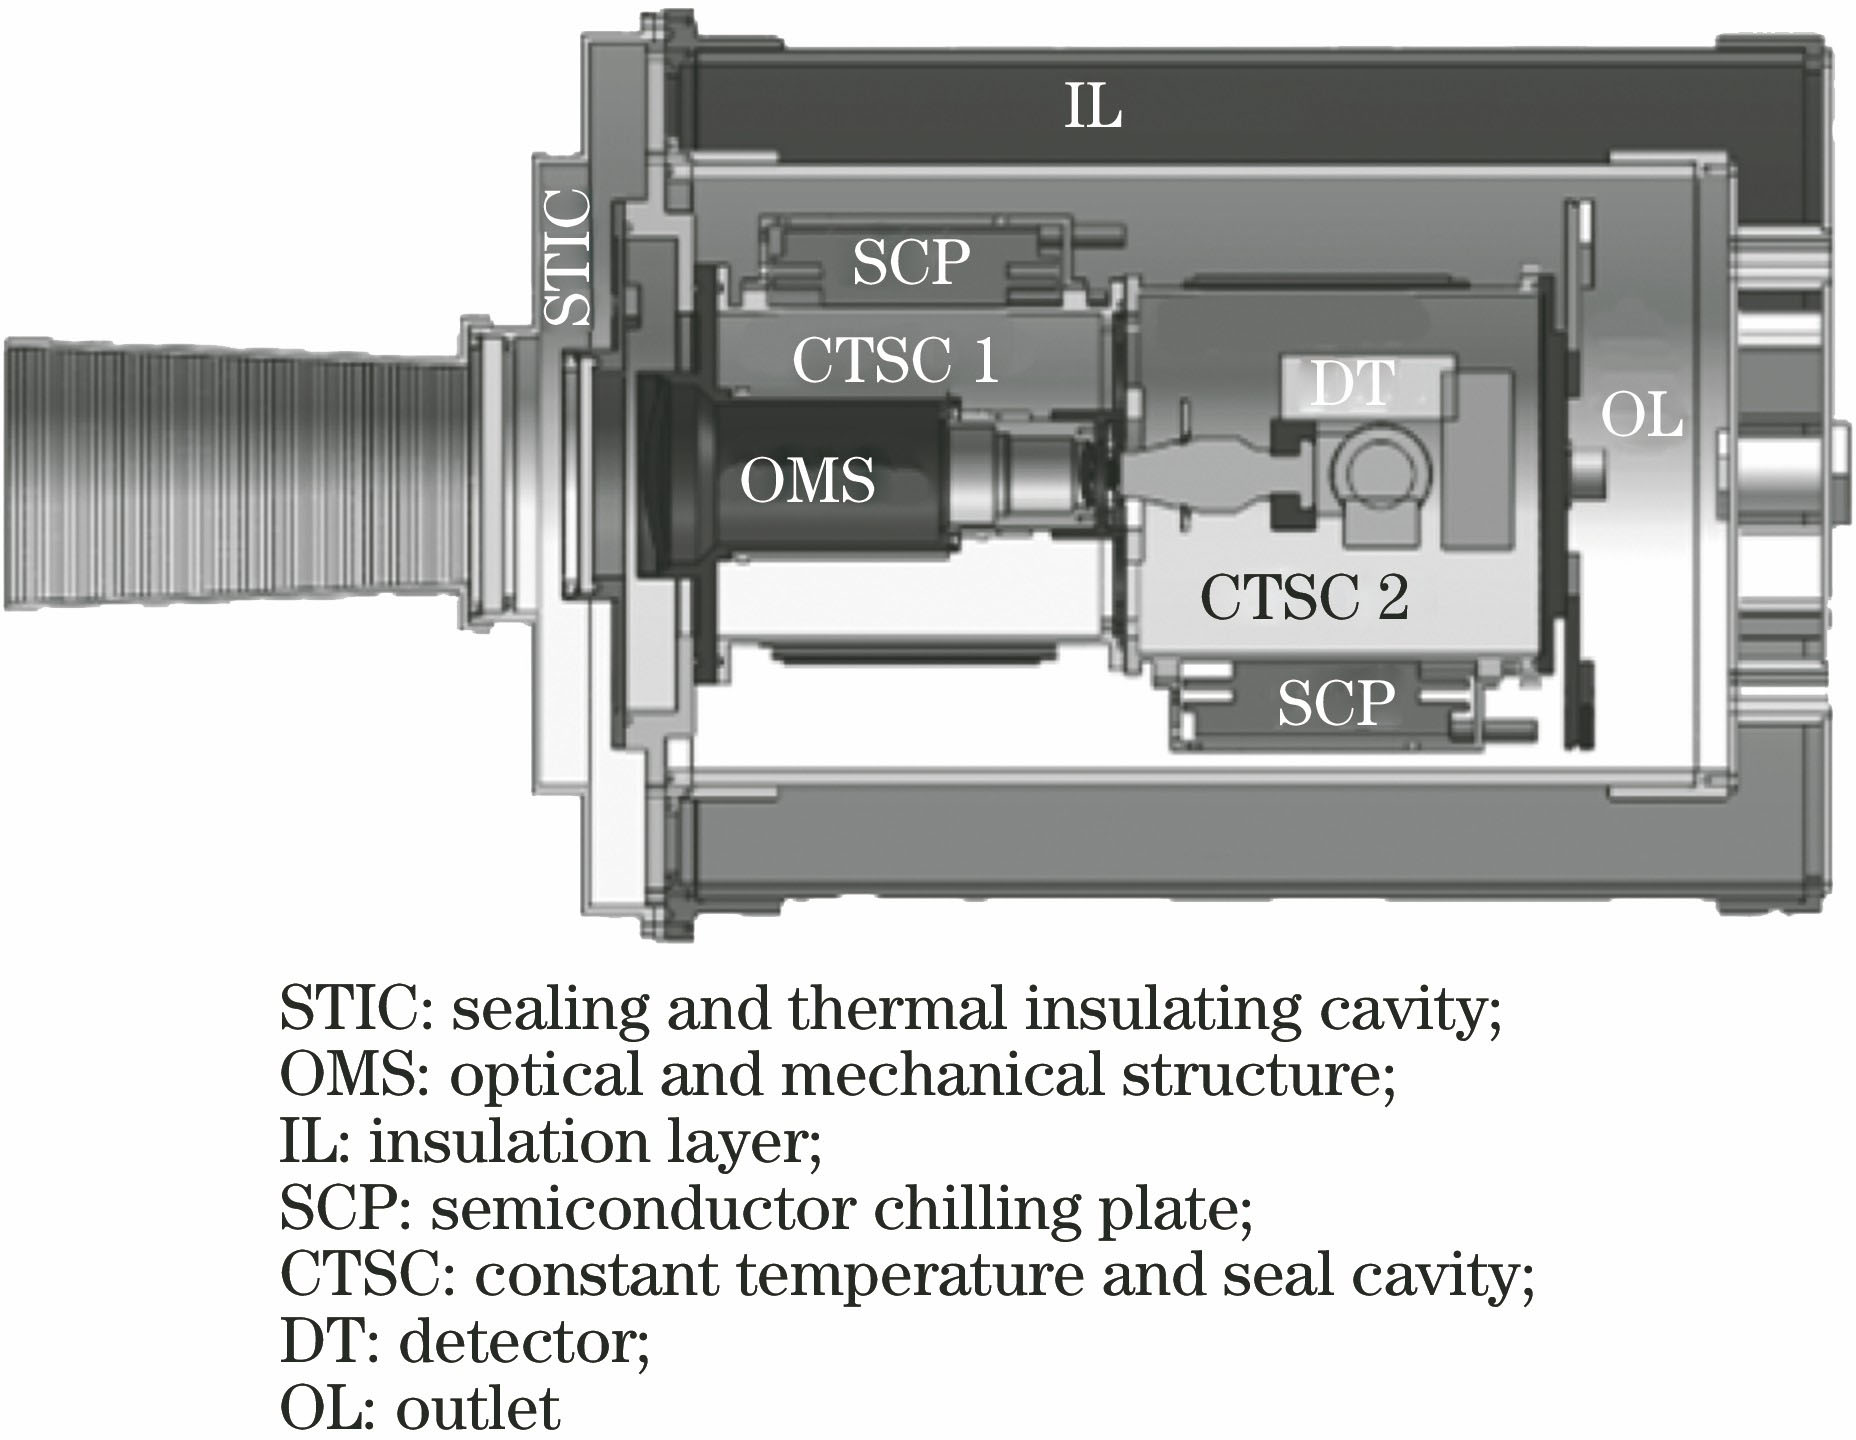 Structural design drawing of refrigeration module in telescope